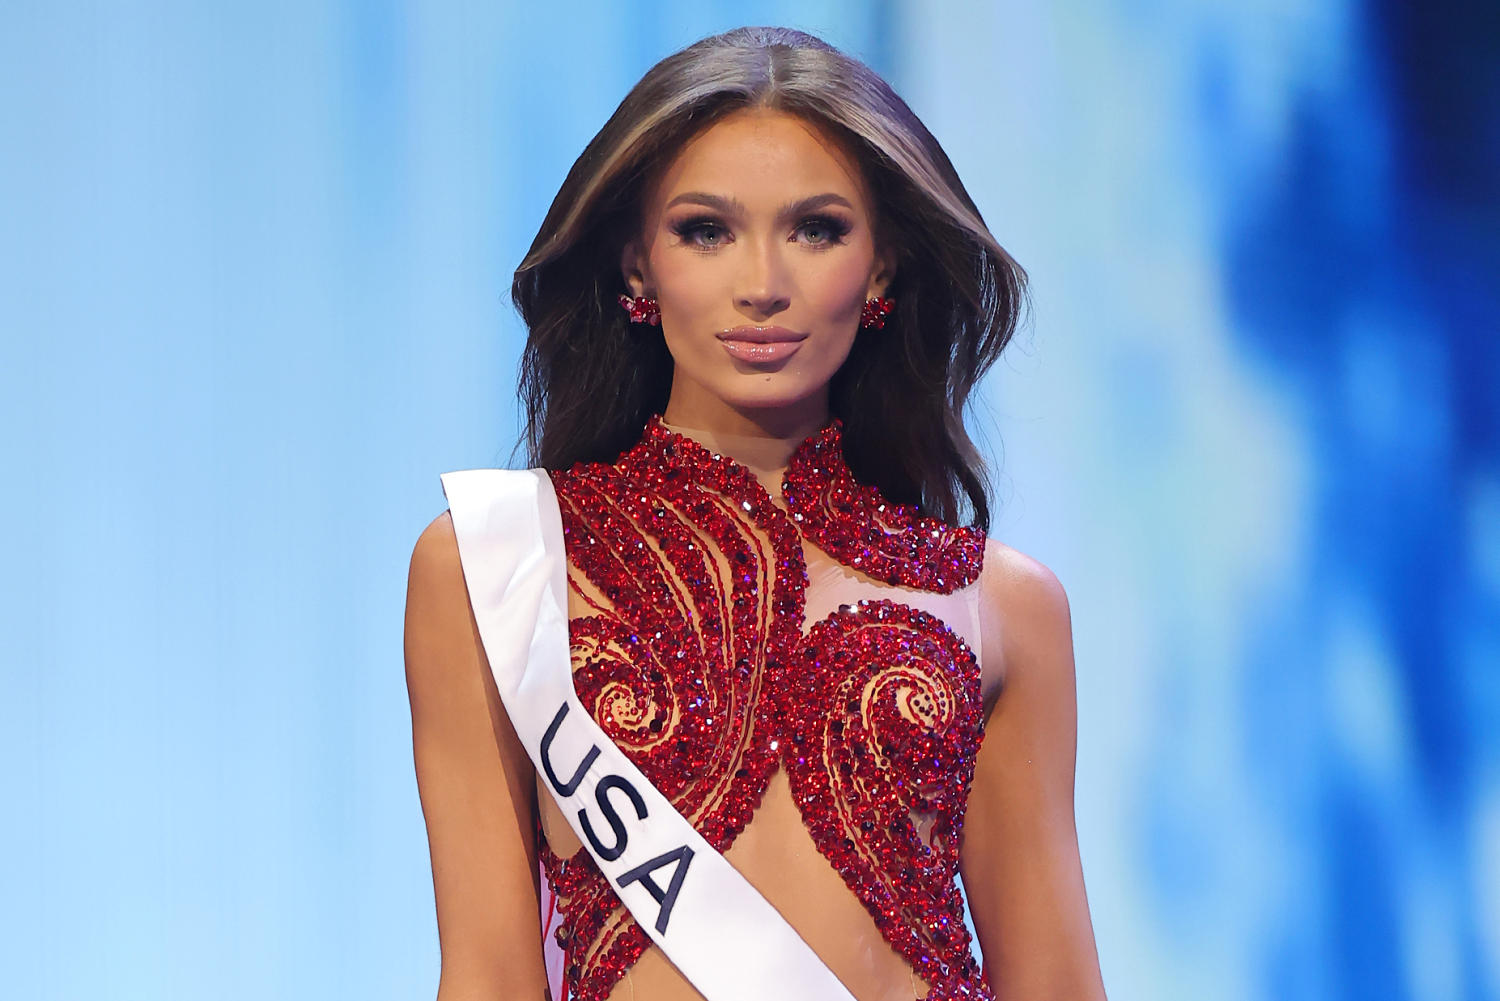 Miss USA Noelia Voigt resigns, cites her mental health while relinquishing crown